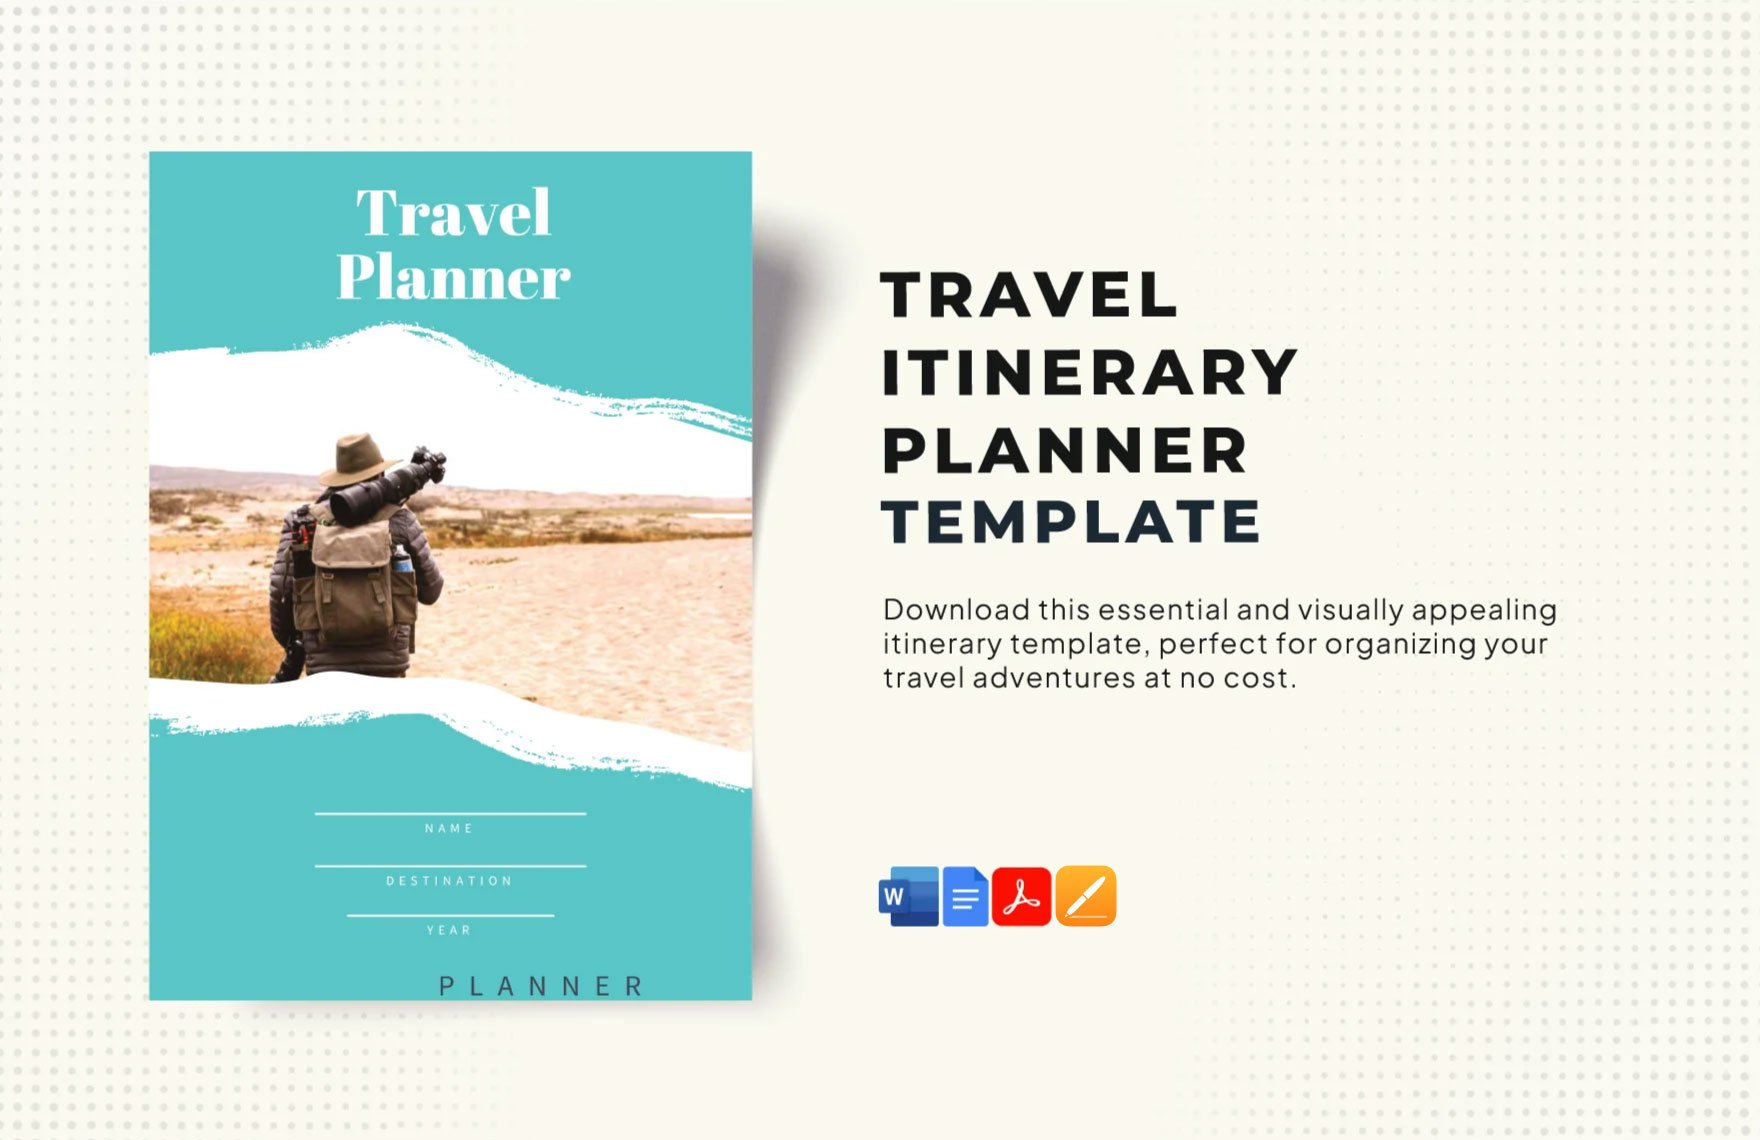 Travel Itinerary Planner Template